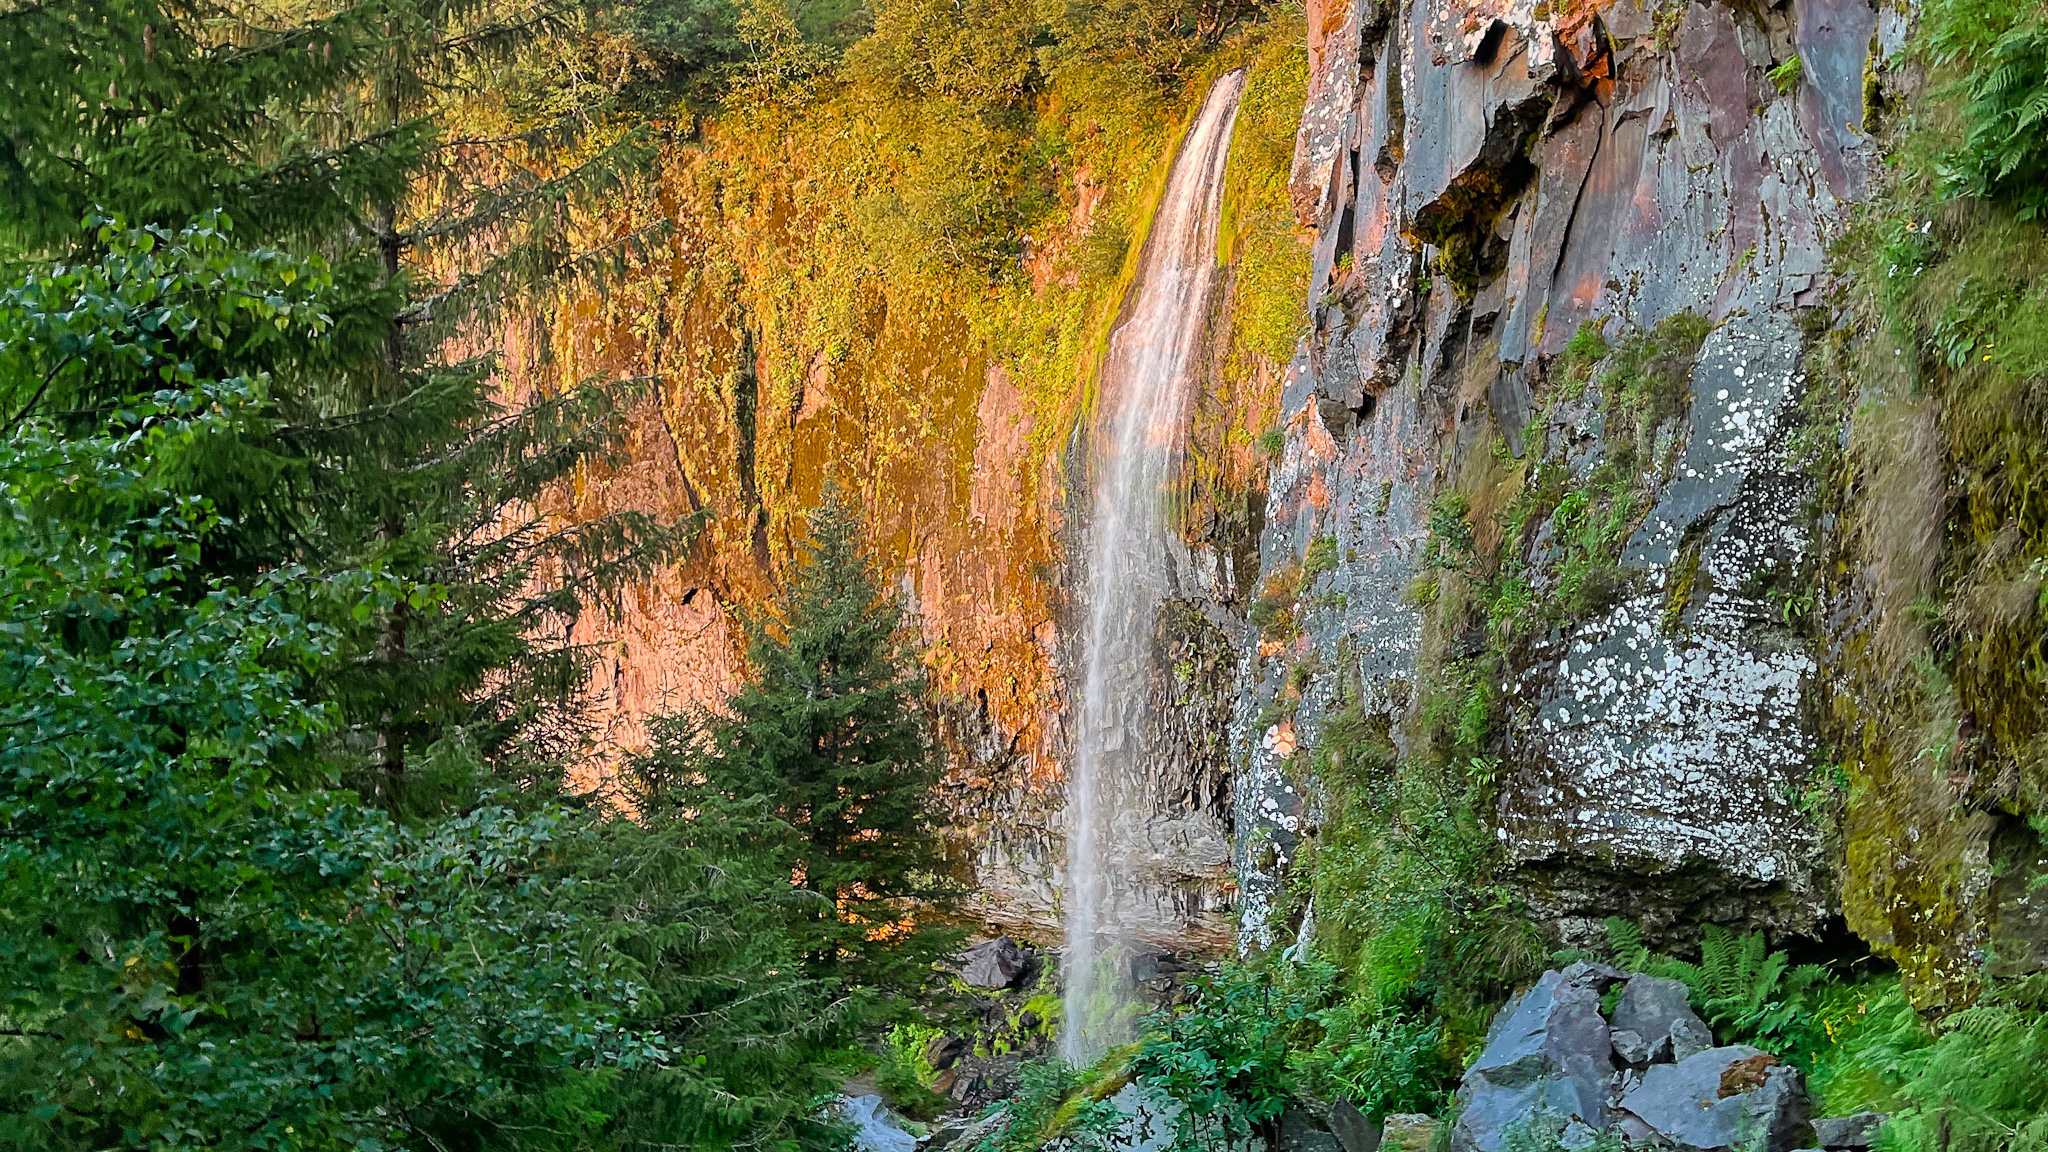 The Grande Cascade at Mont Dore, the dizzying fall